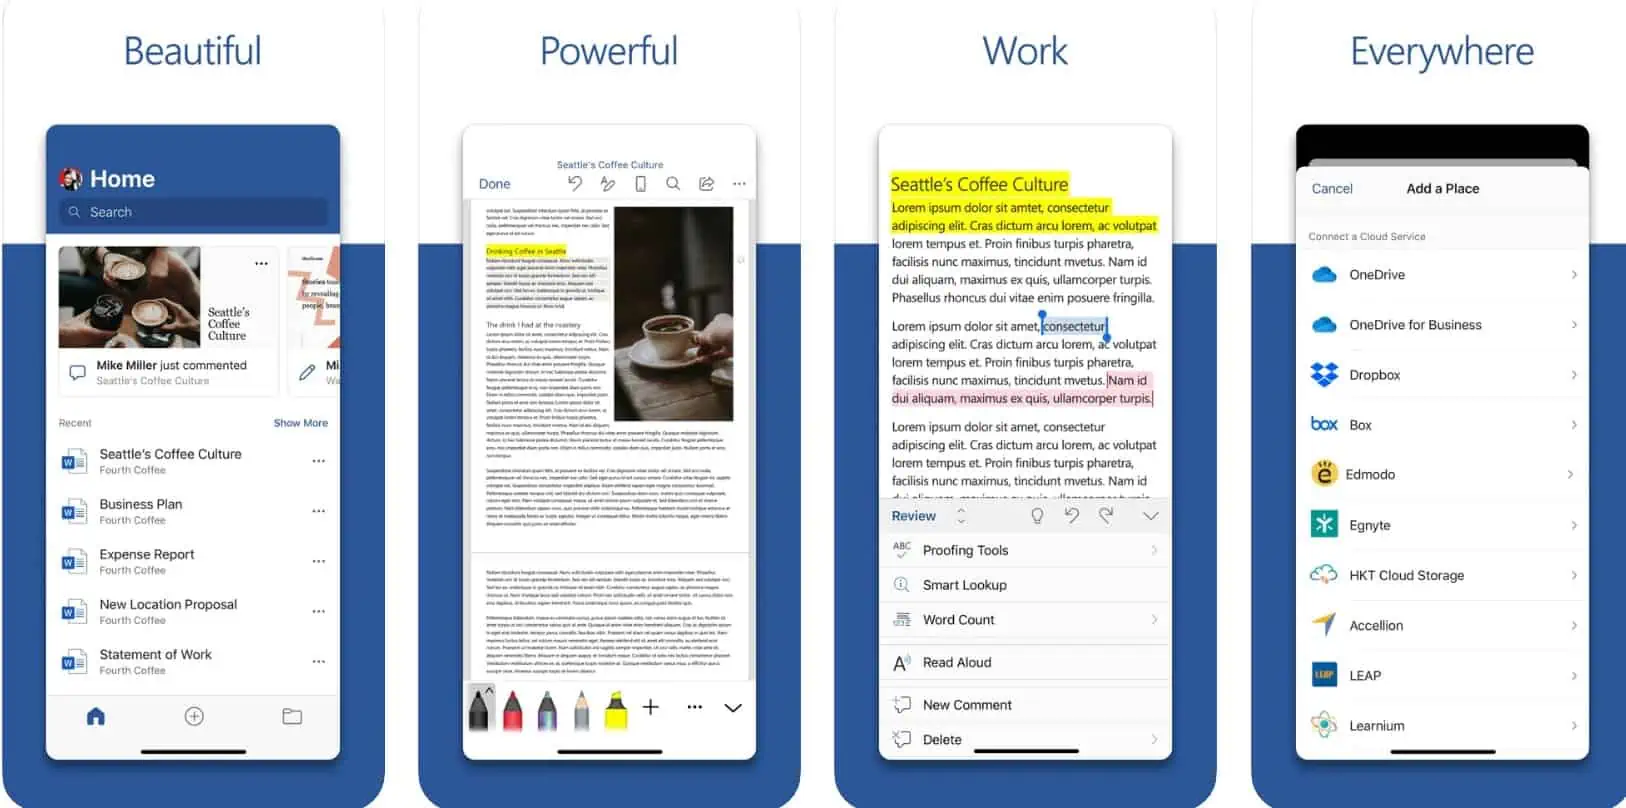 Microsoft is rolling out Header navigation to Word for iOS and Android